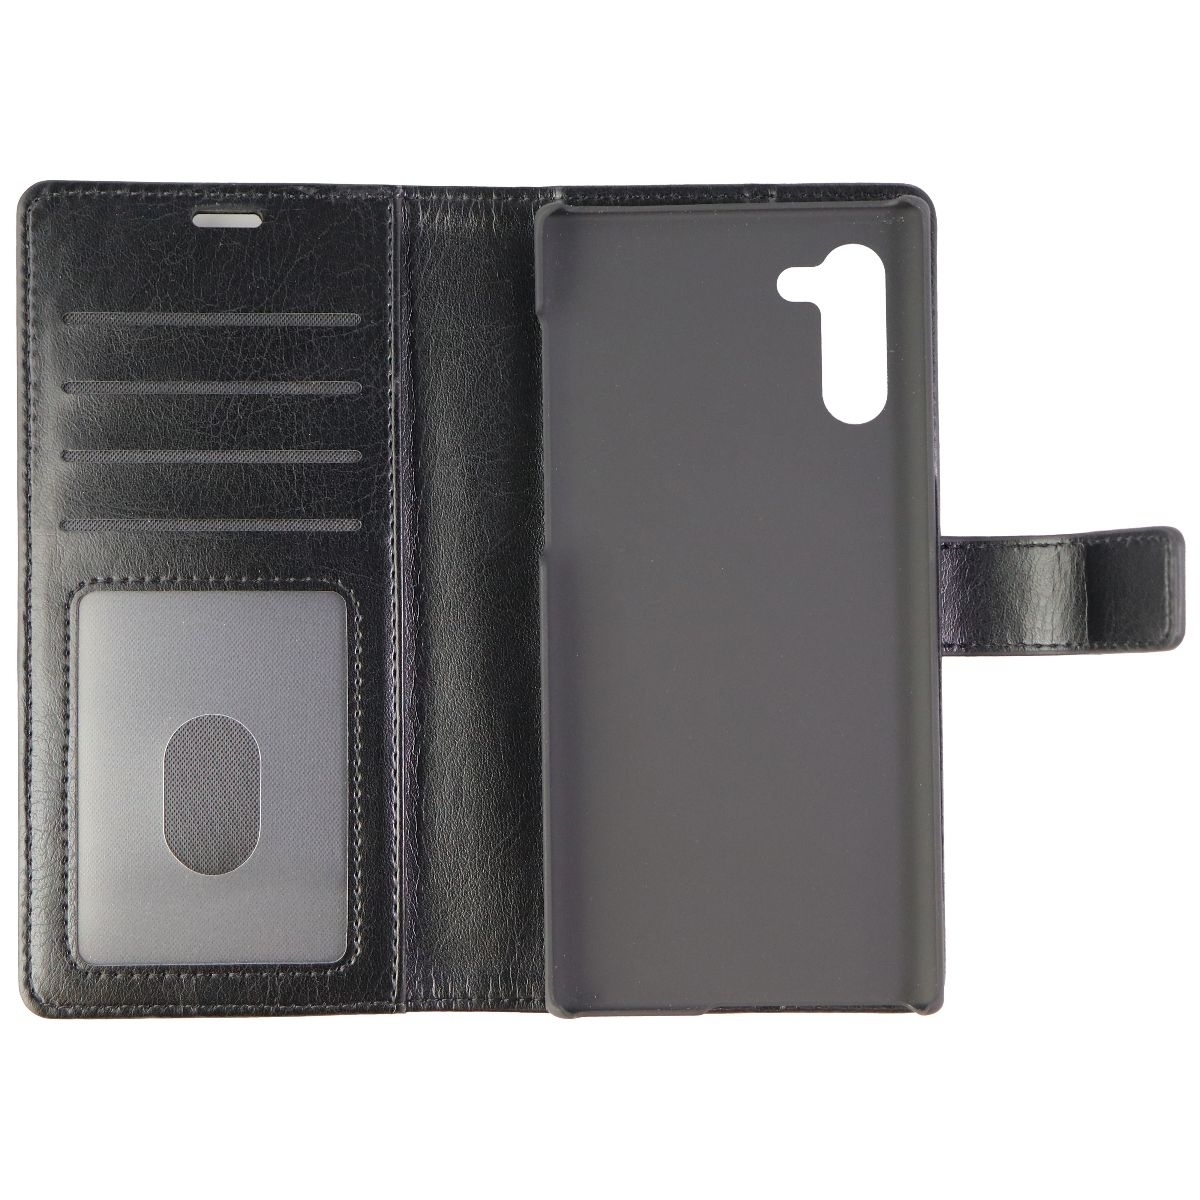 SkechPolo Book Wallet Cover With Detachable Case For Galaxy Note10 - Black